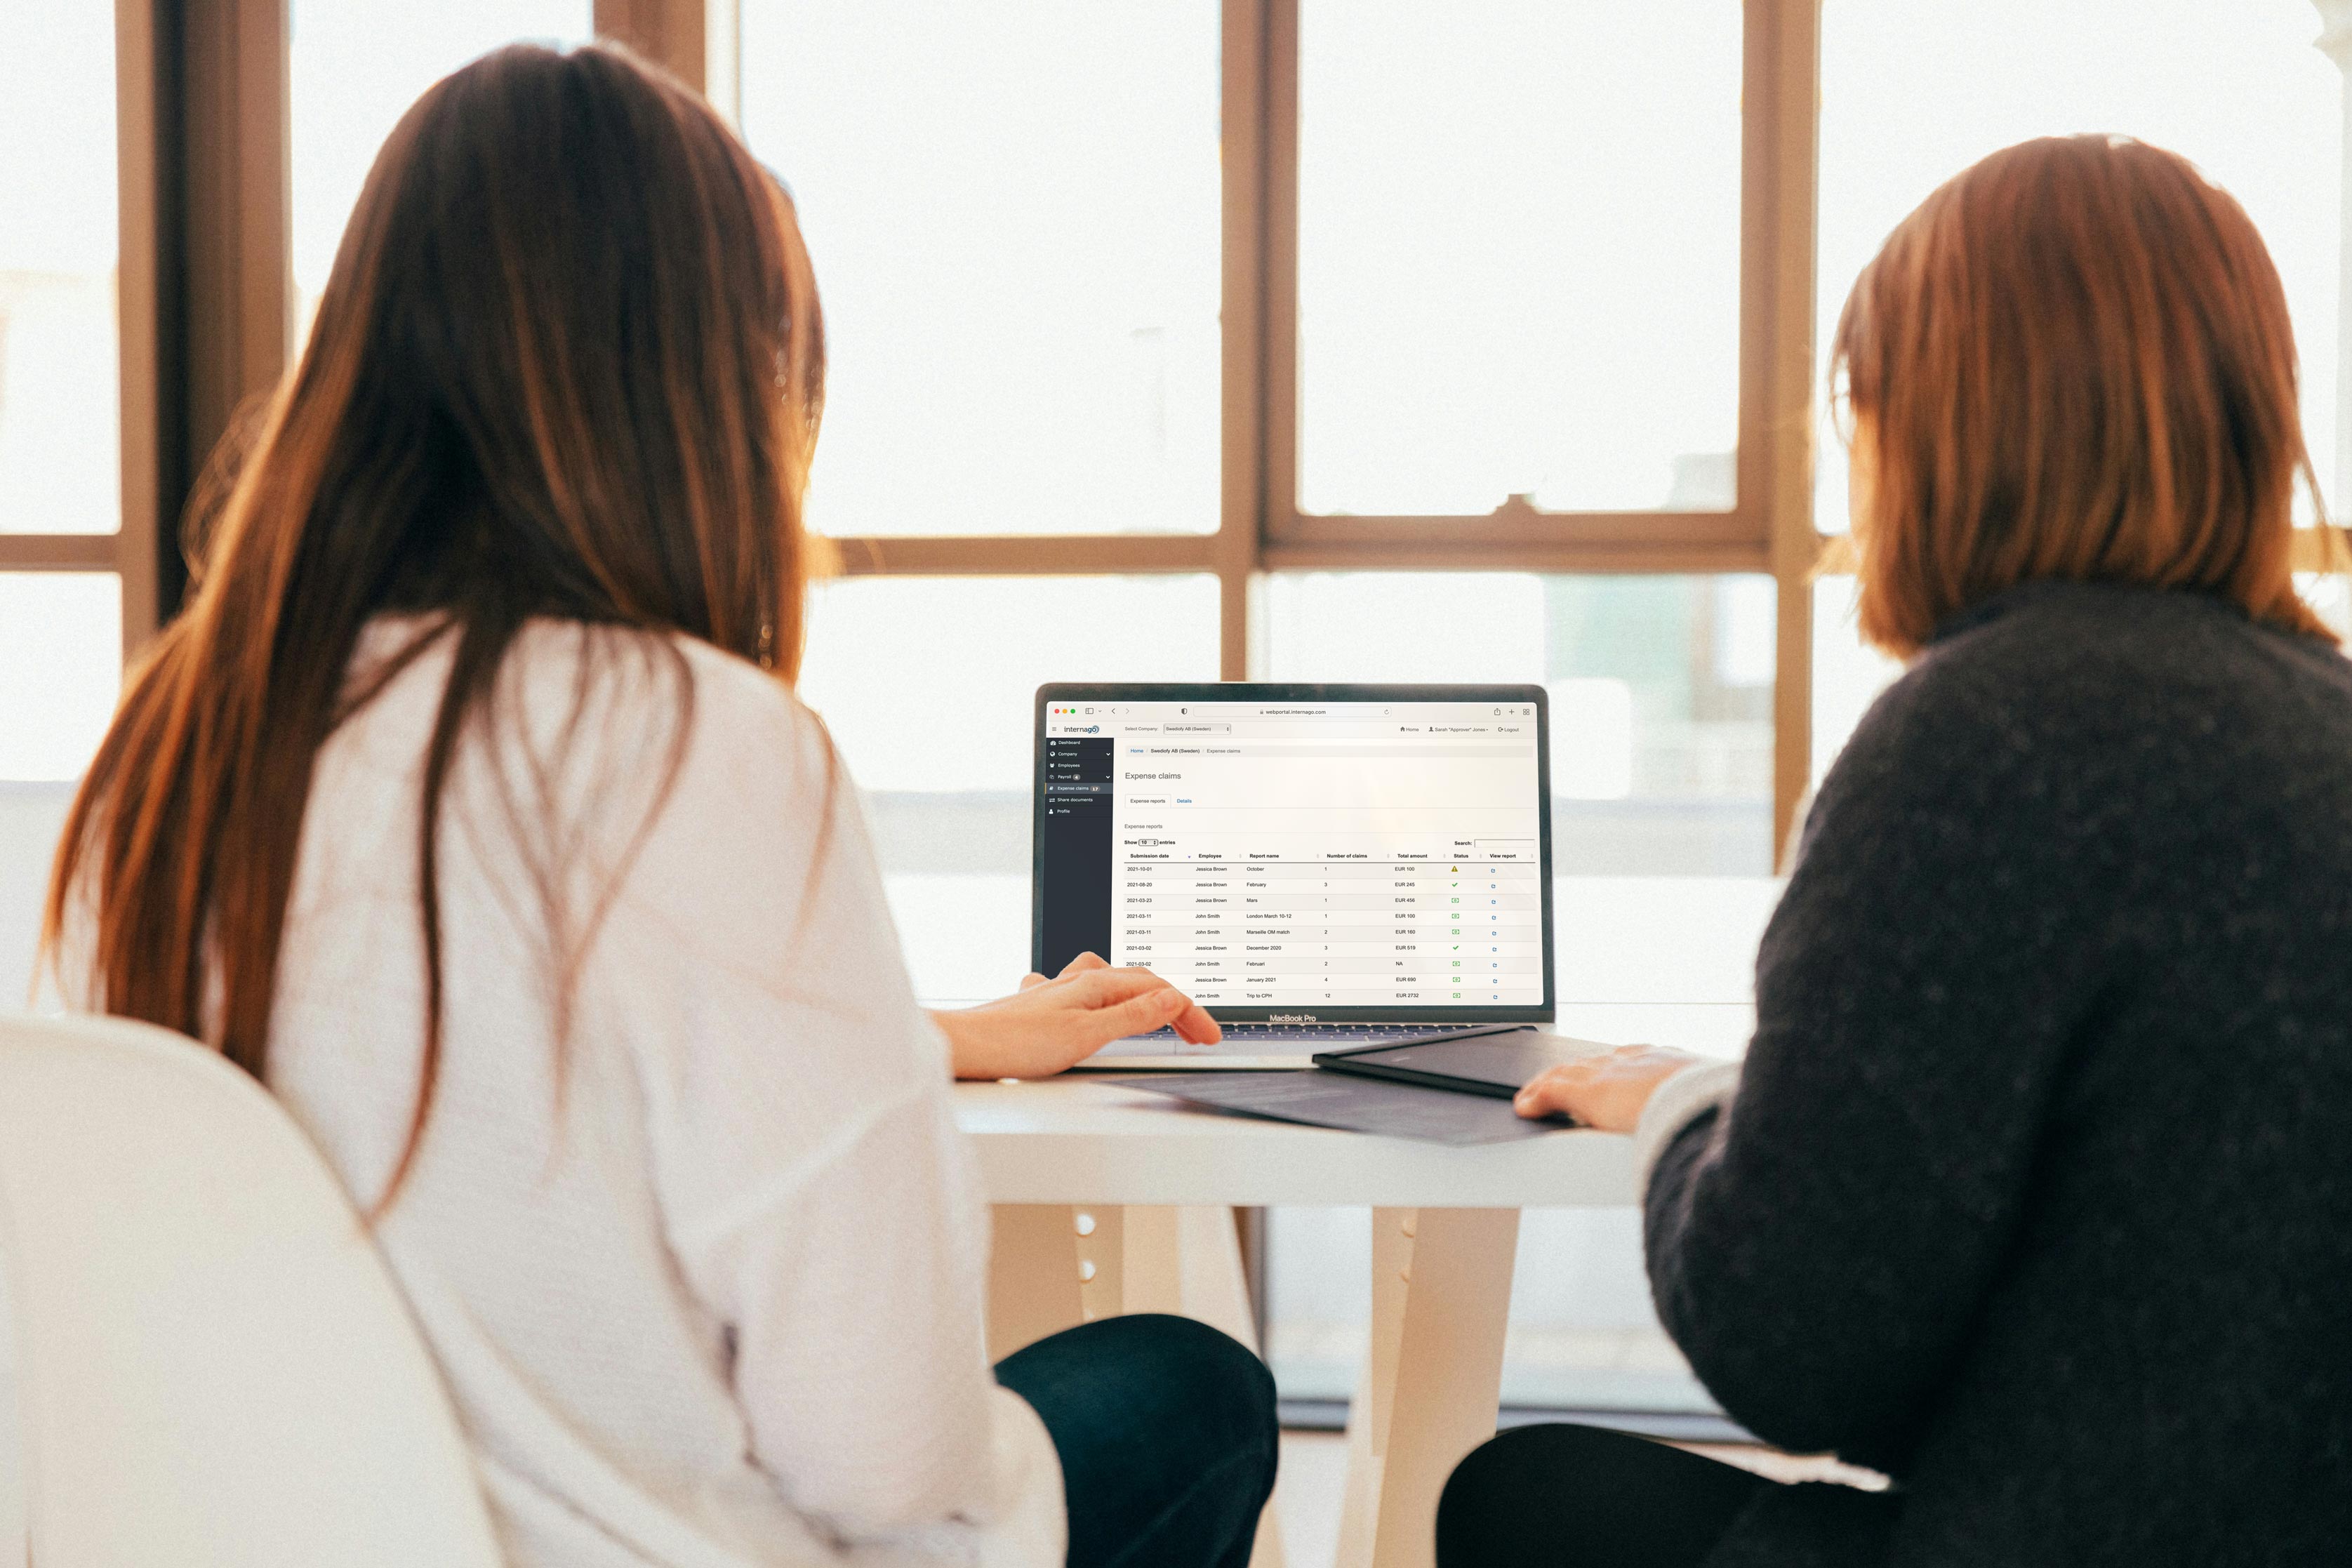 The image captures a dynamic scene of two motivated individuals actively working together on a project,that symbolize data-driven decision-making.